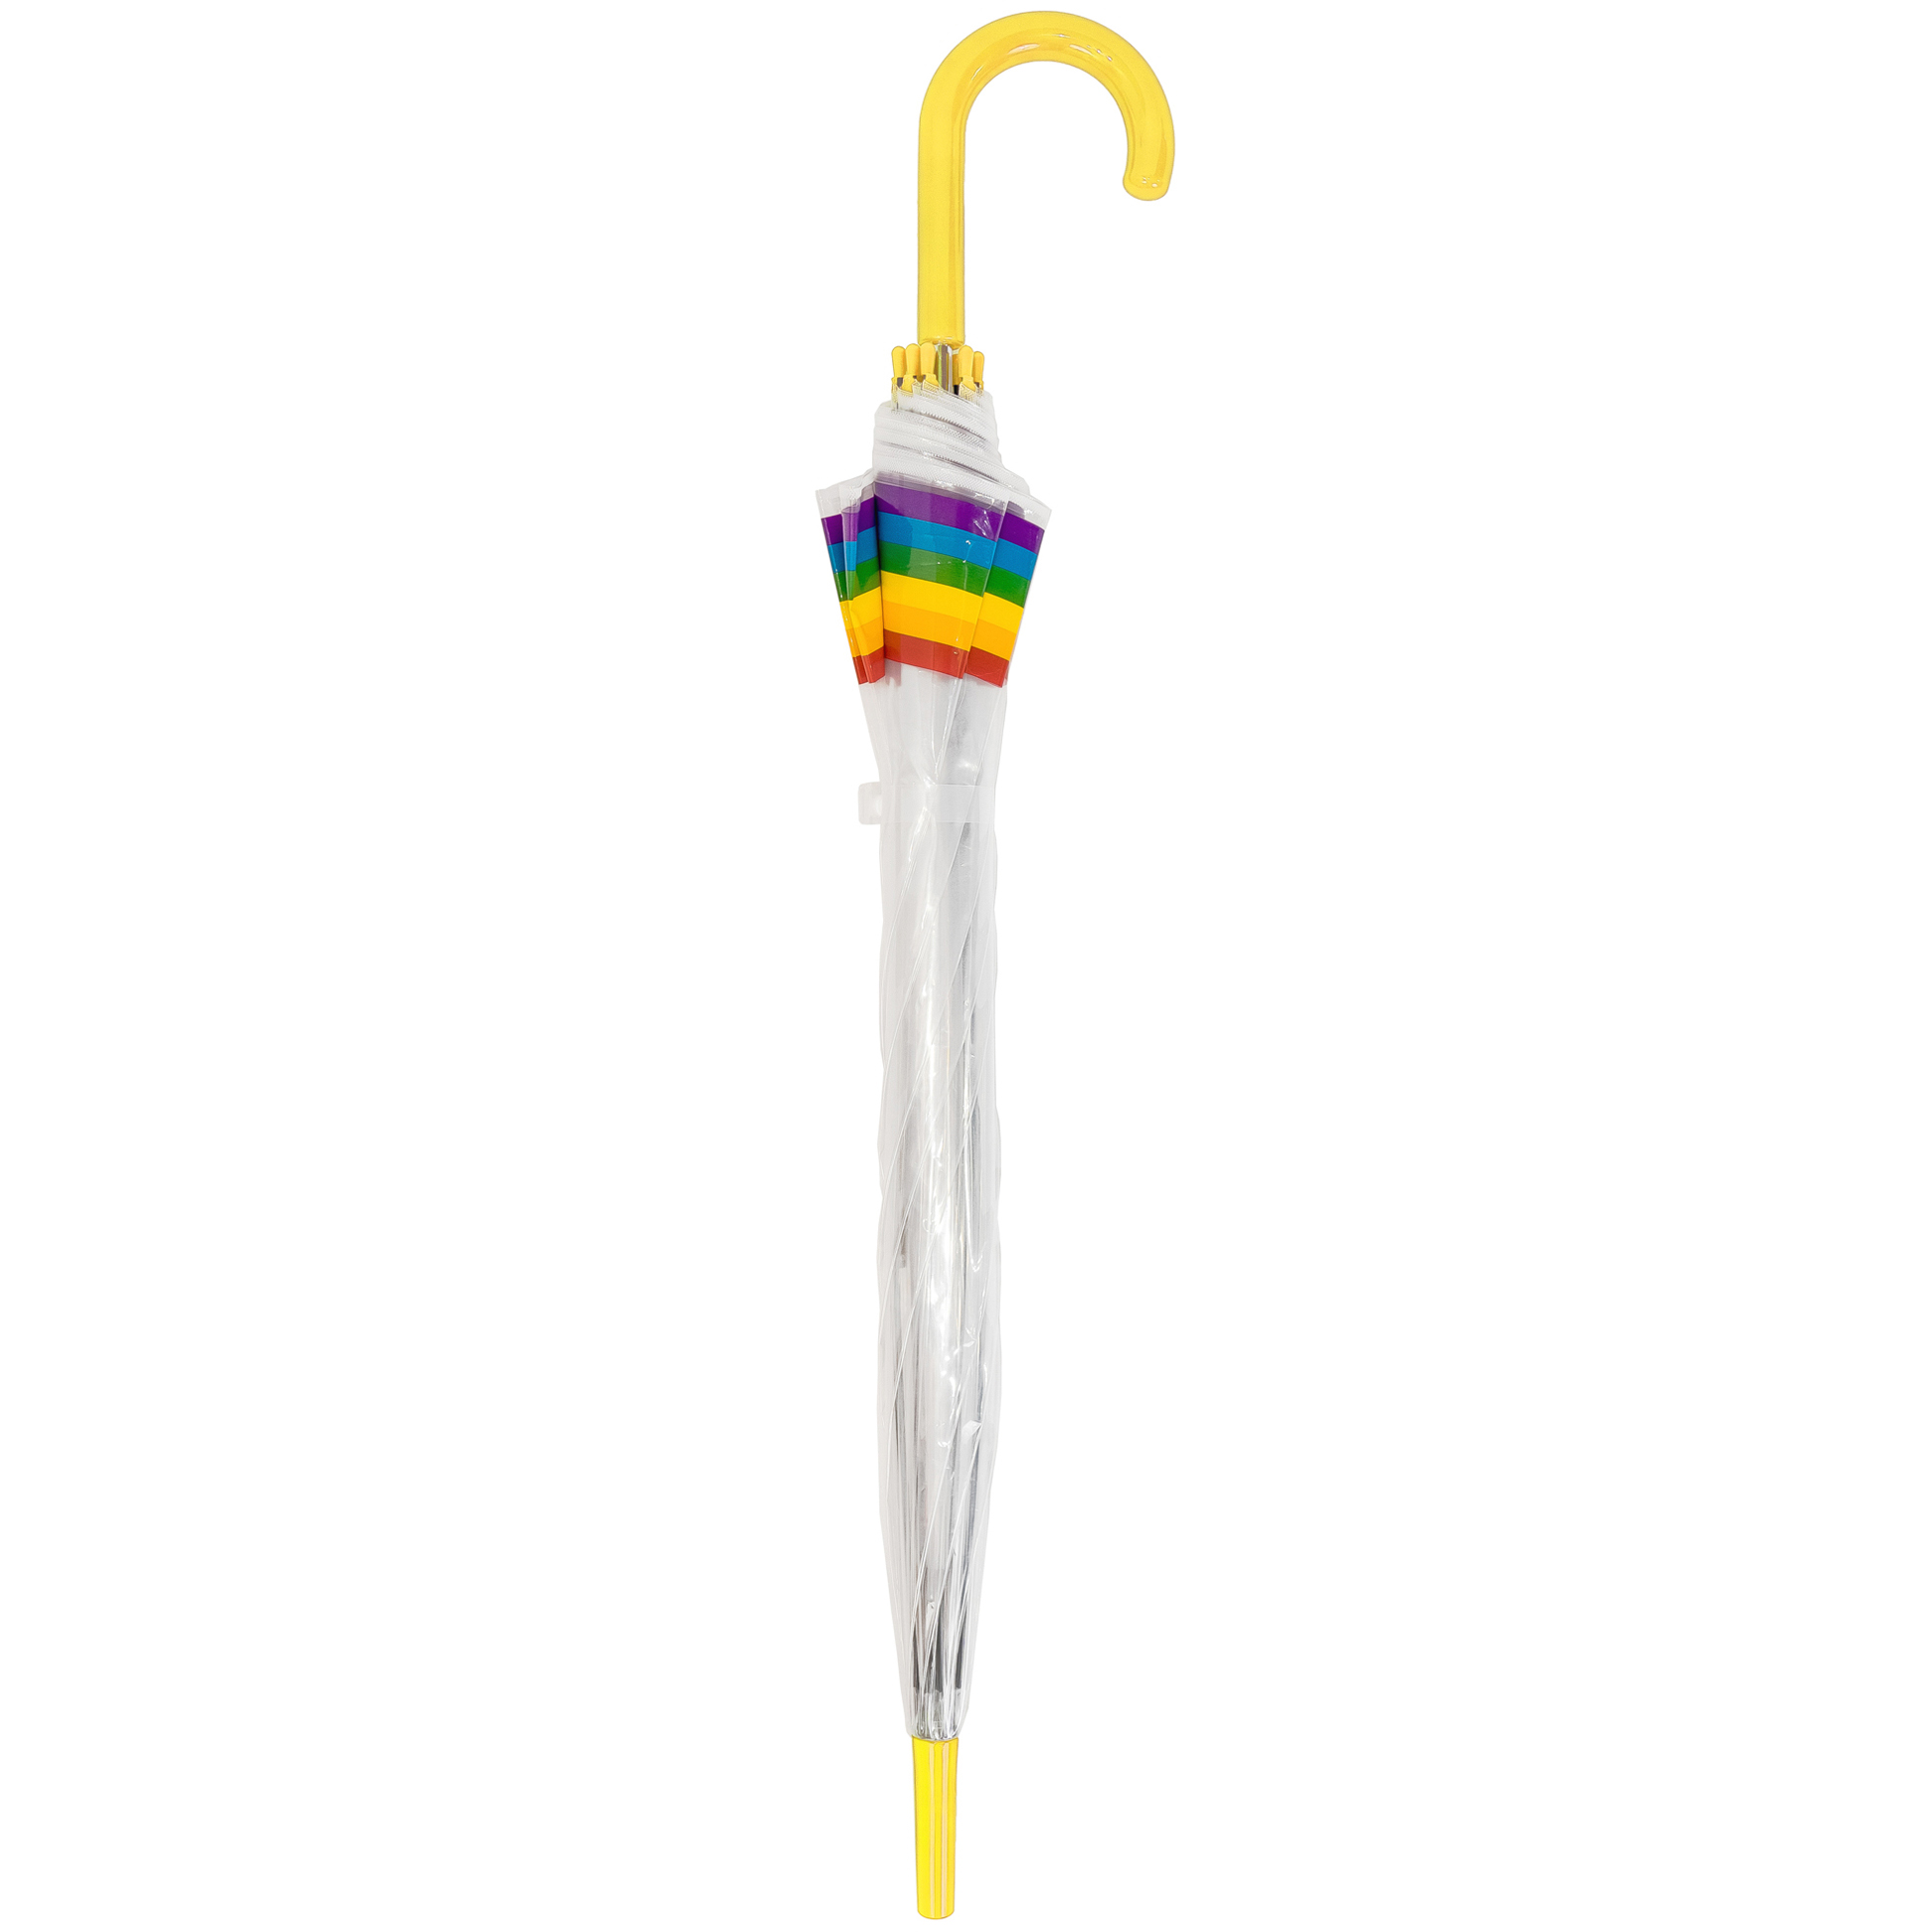 Rainbow Border Clear Dome Umbrella - Adult size - Yellow Handle (18022-Y)